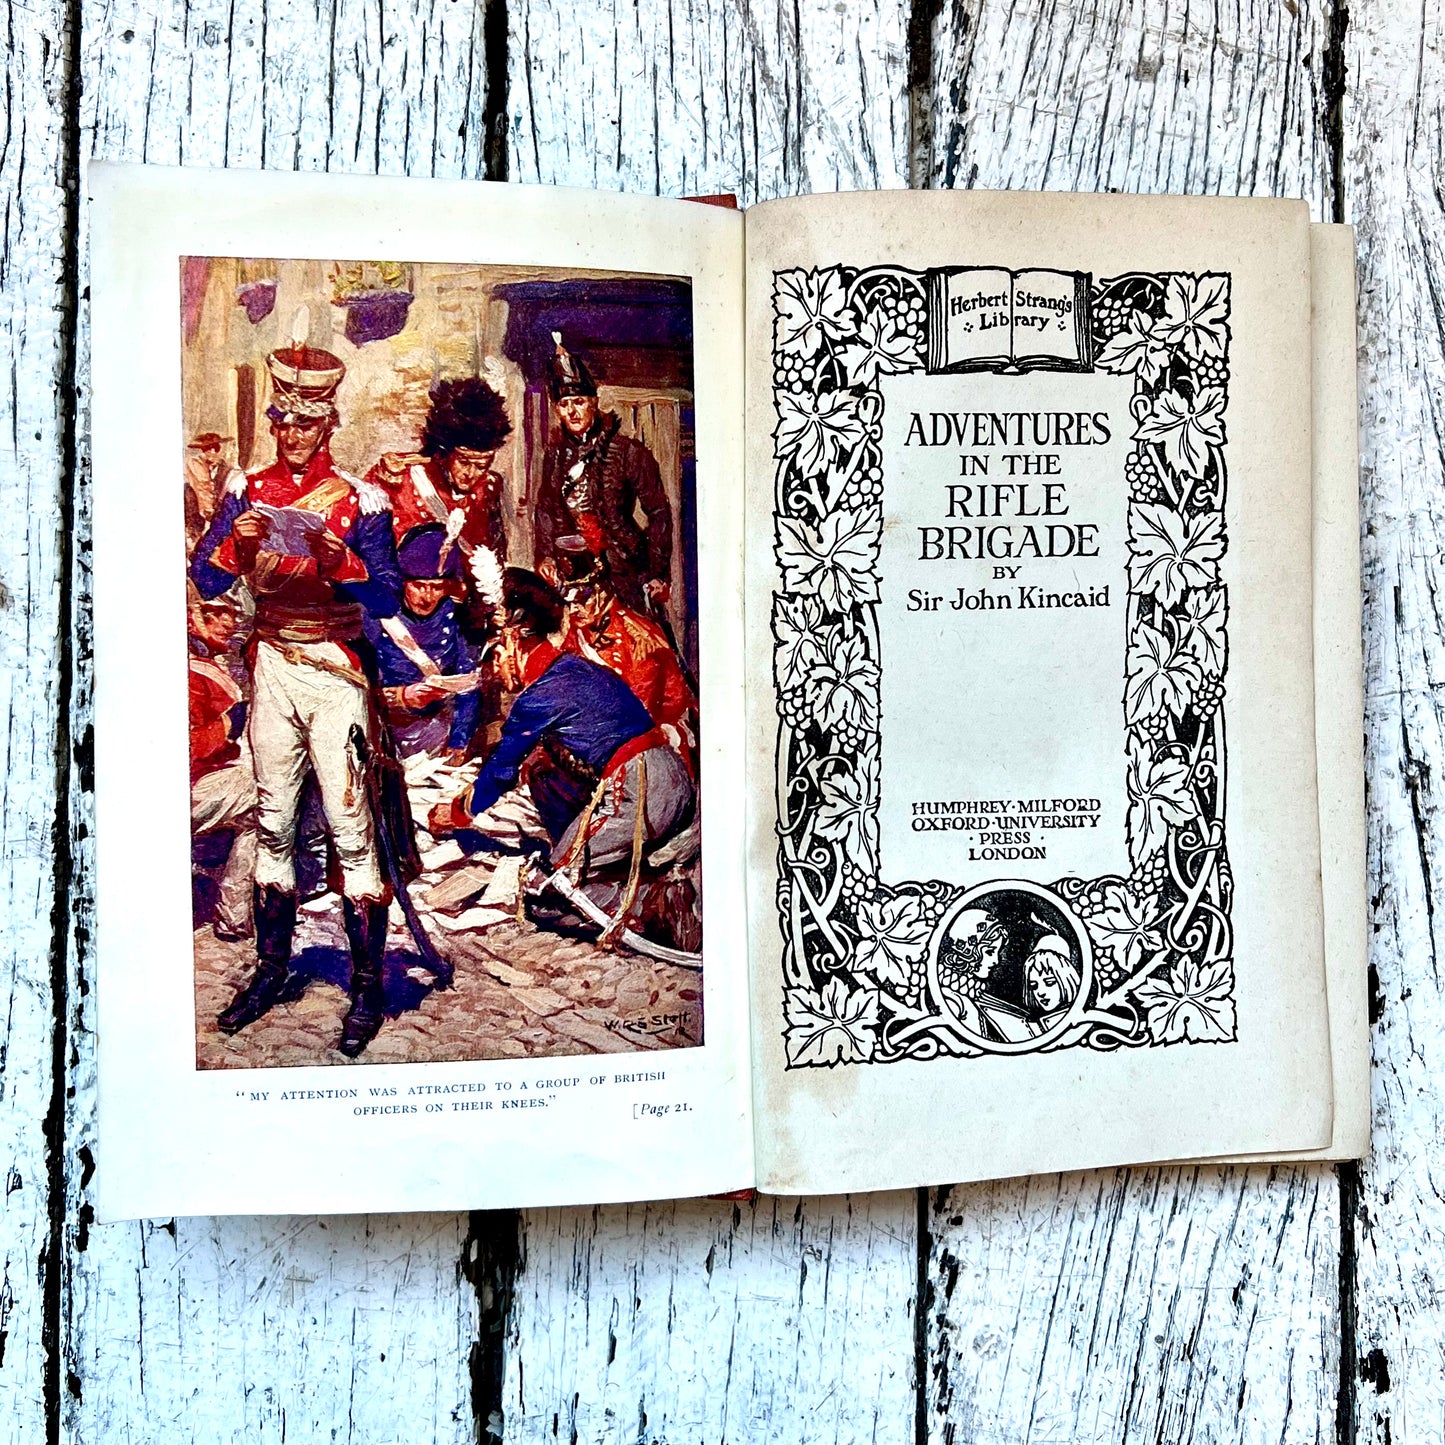 Antique hardcover “Adventures in the Rifle Brigade” book by Sir John Kincaid, Herbert Strang’s Library, 1919 edition.